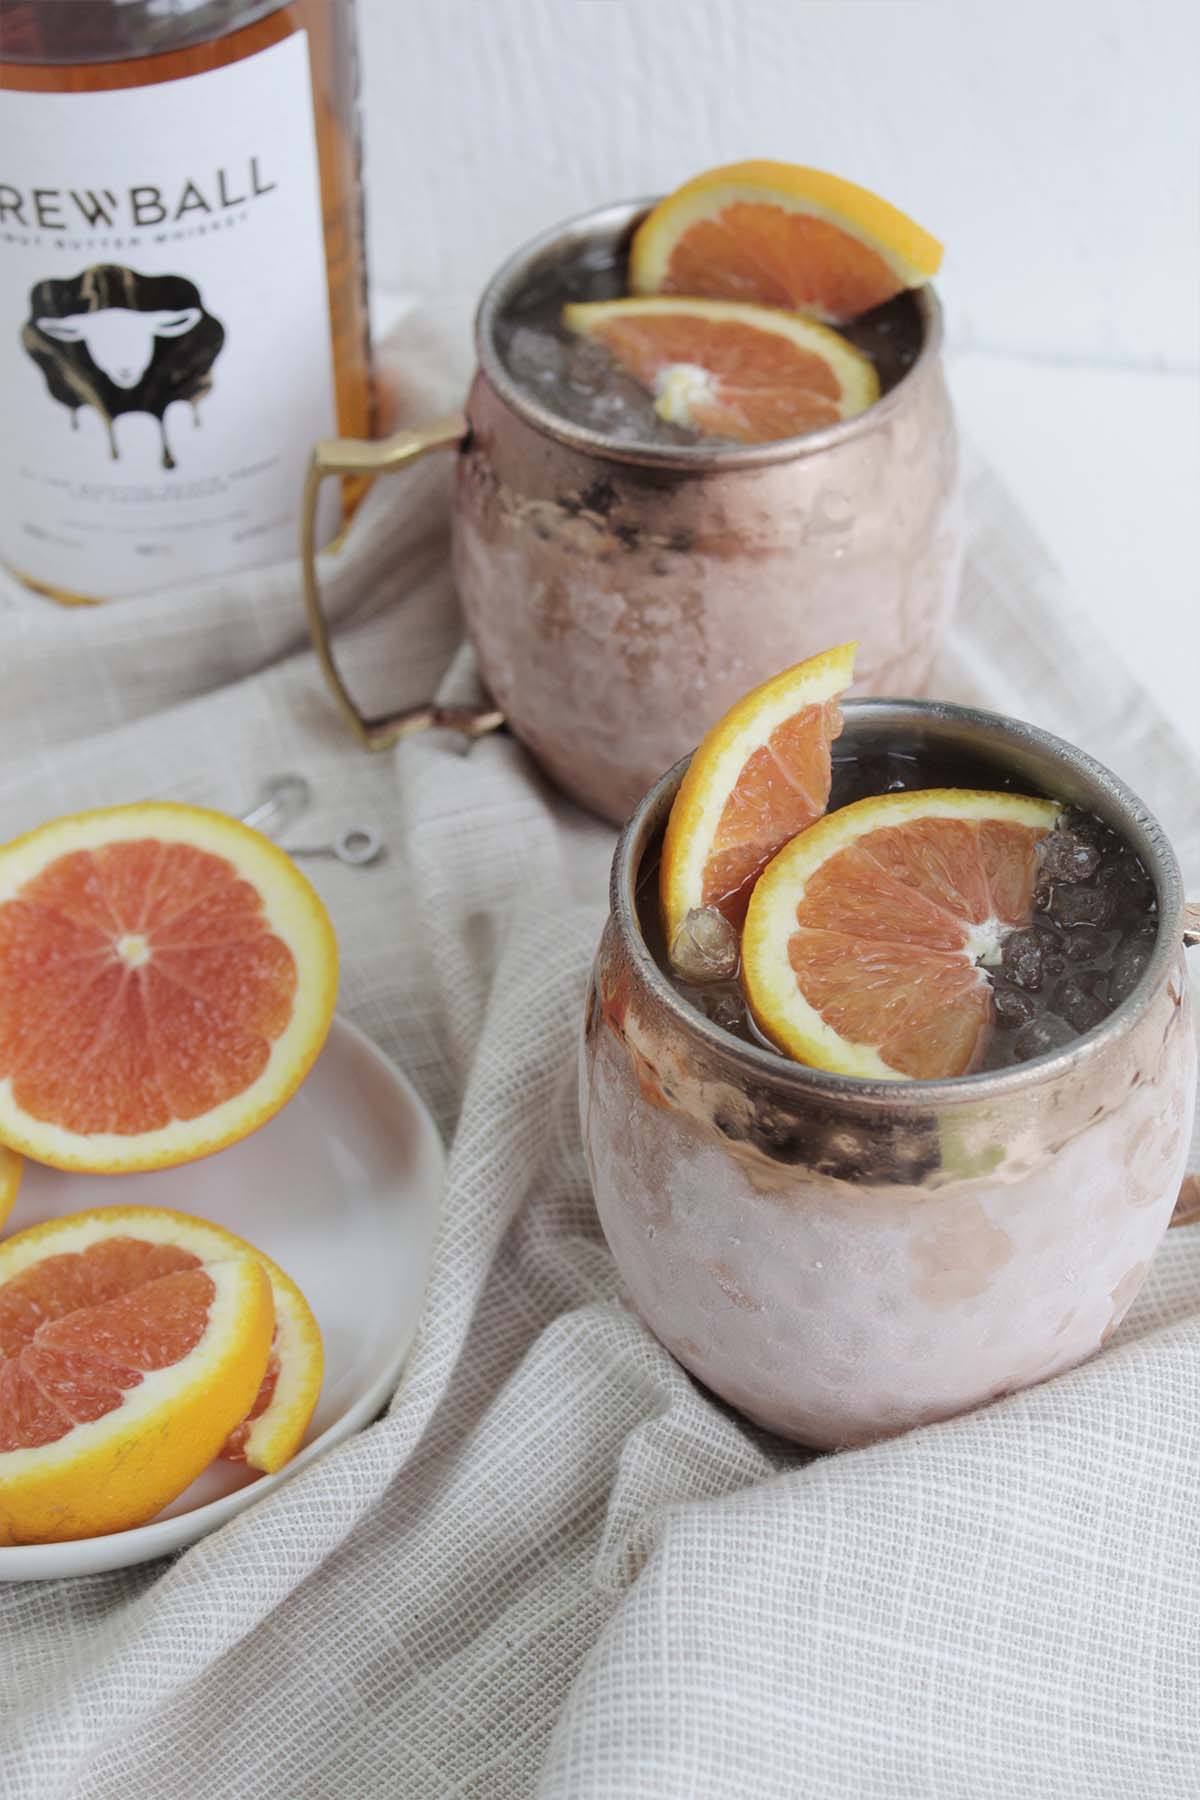 two copper cocktail mugs next to Skrewball bottle and orange slices.